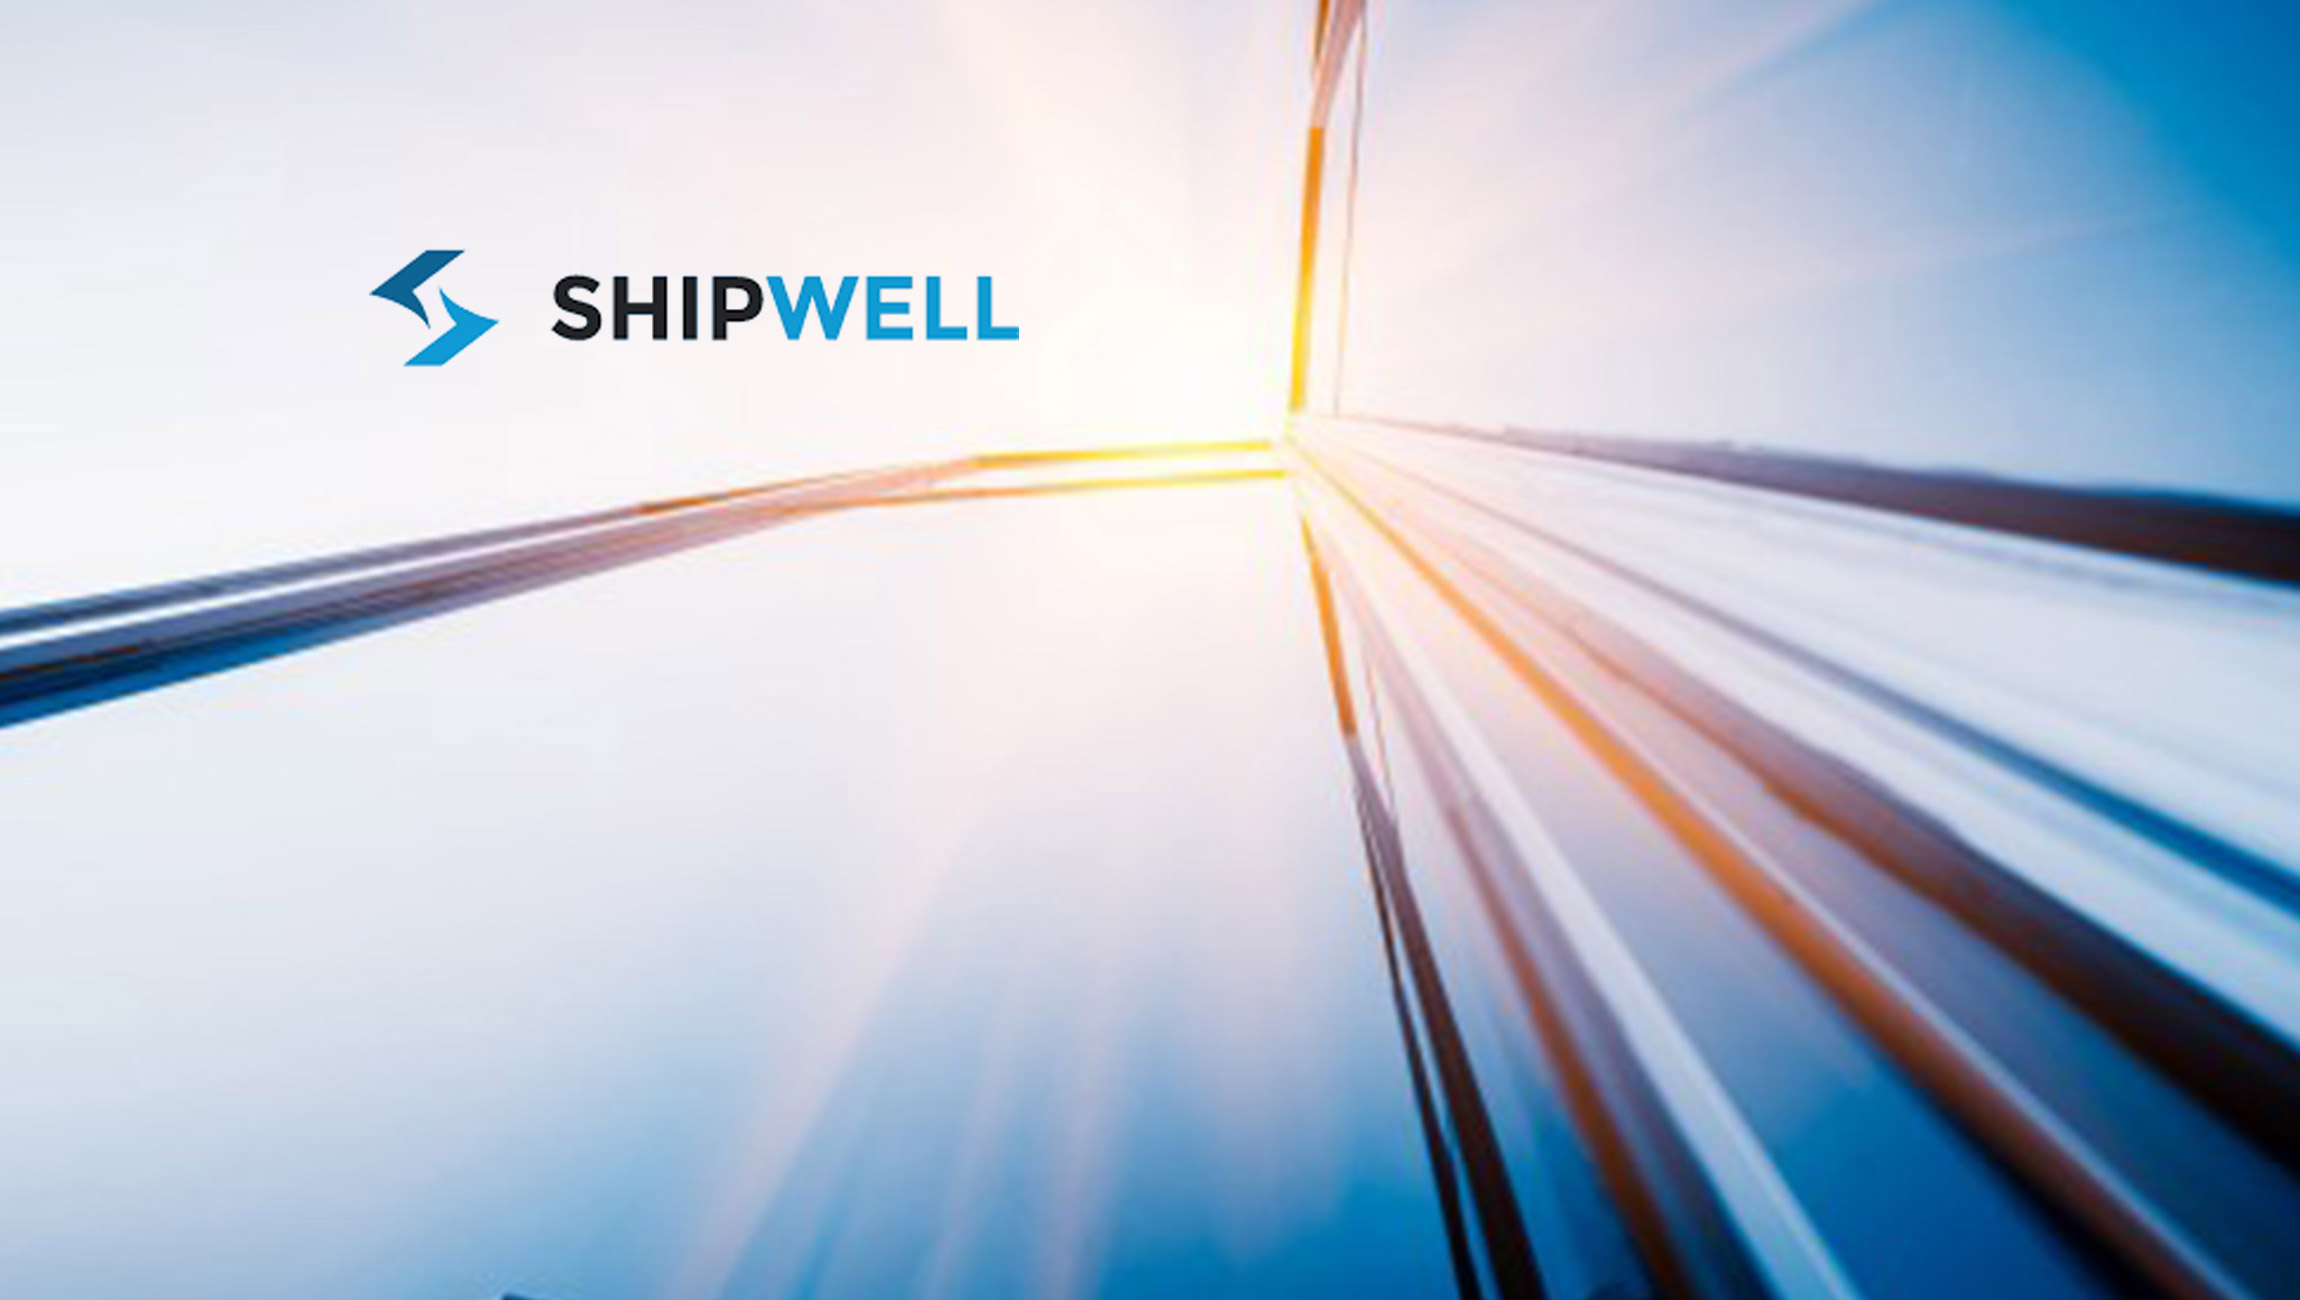 Shipwell-Ranked-Fourth-Fastest-Growing-Company-in-North-America-on-the-2021-Deloitte-Technology-Fast-500™